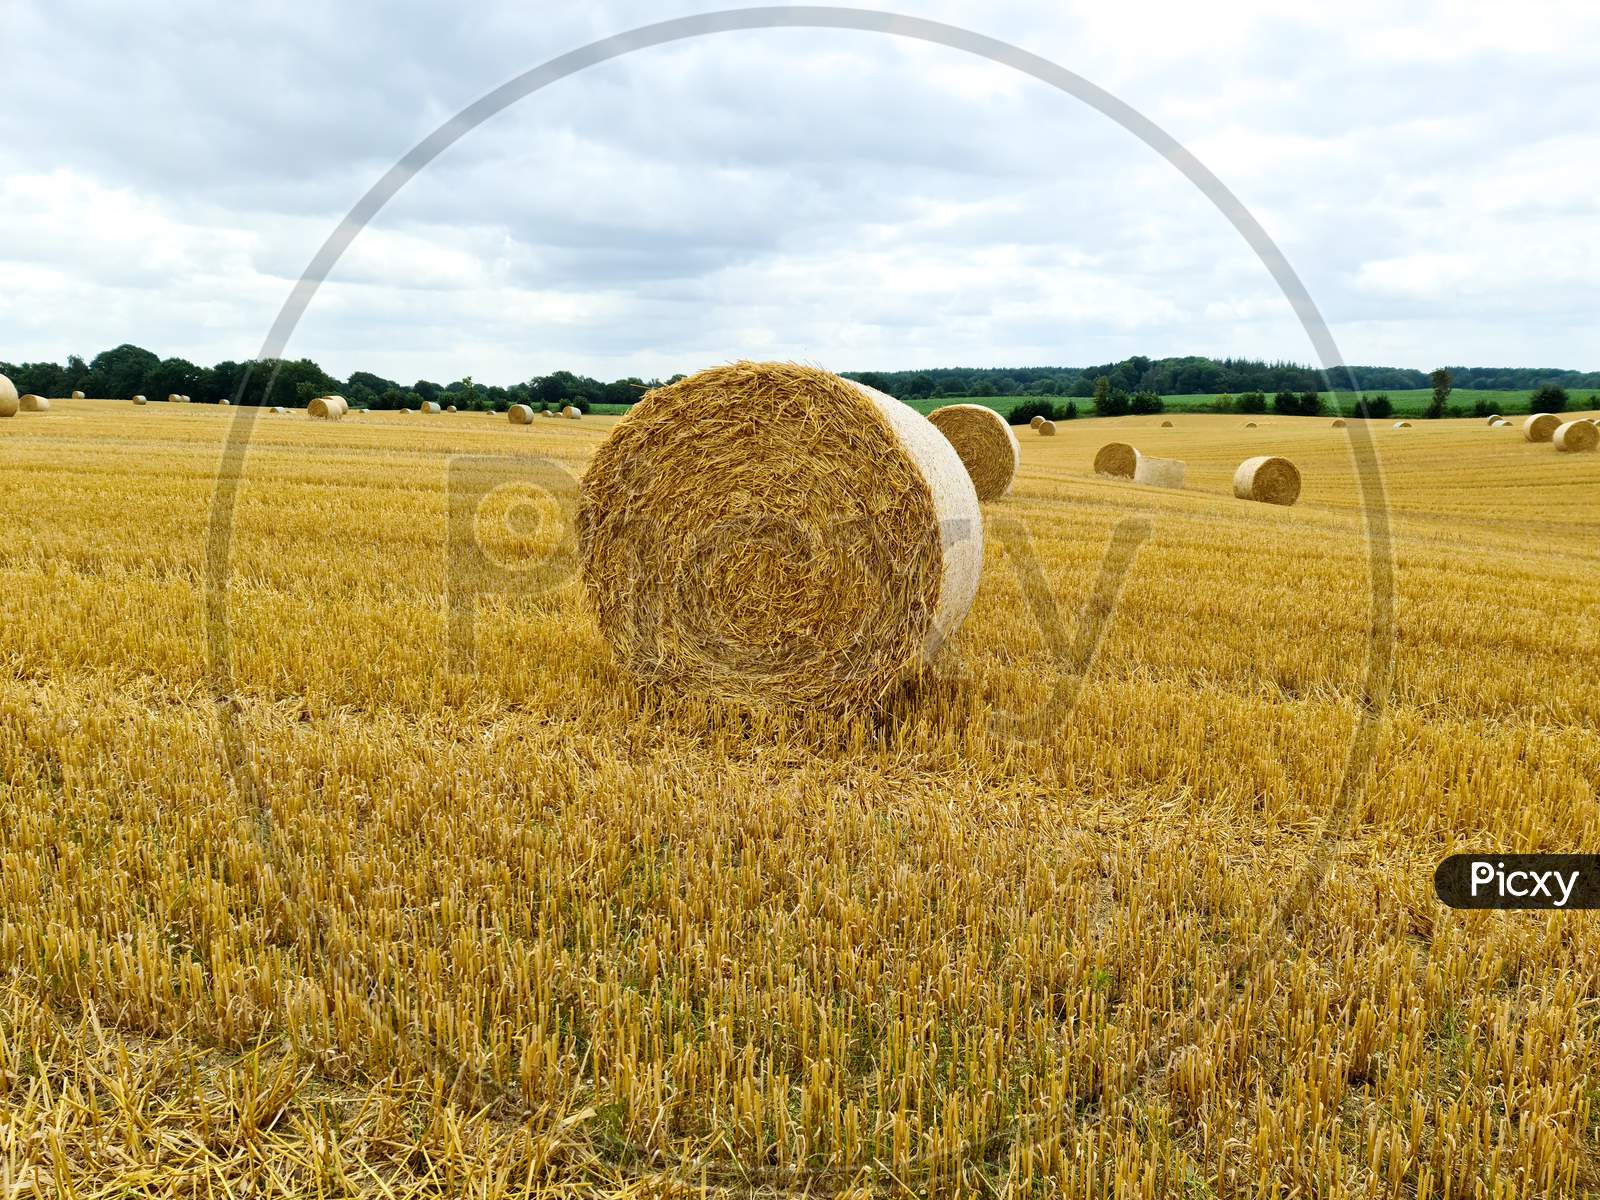 Summer View On An Agricultural Wheat Field With Straw Bales Been Harvested